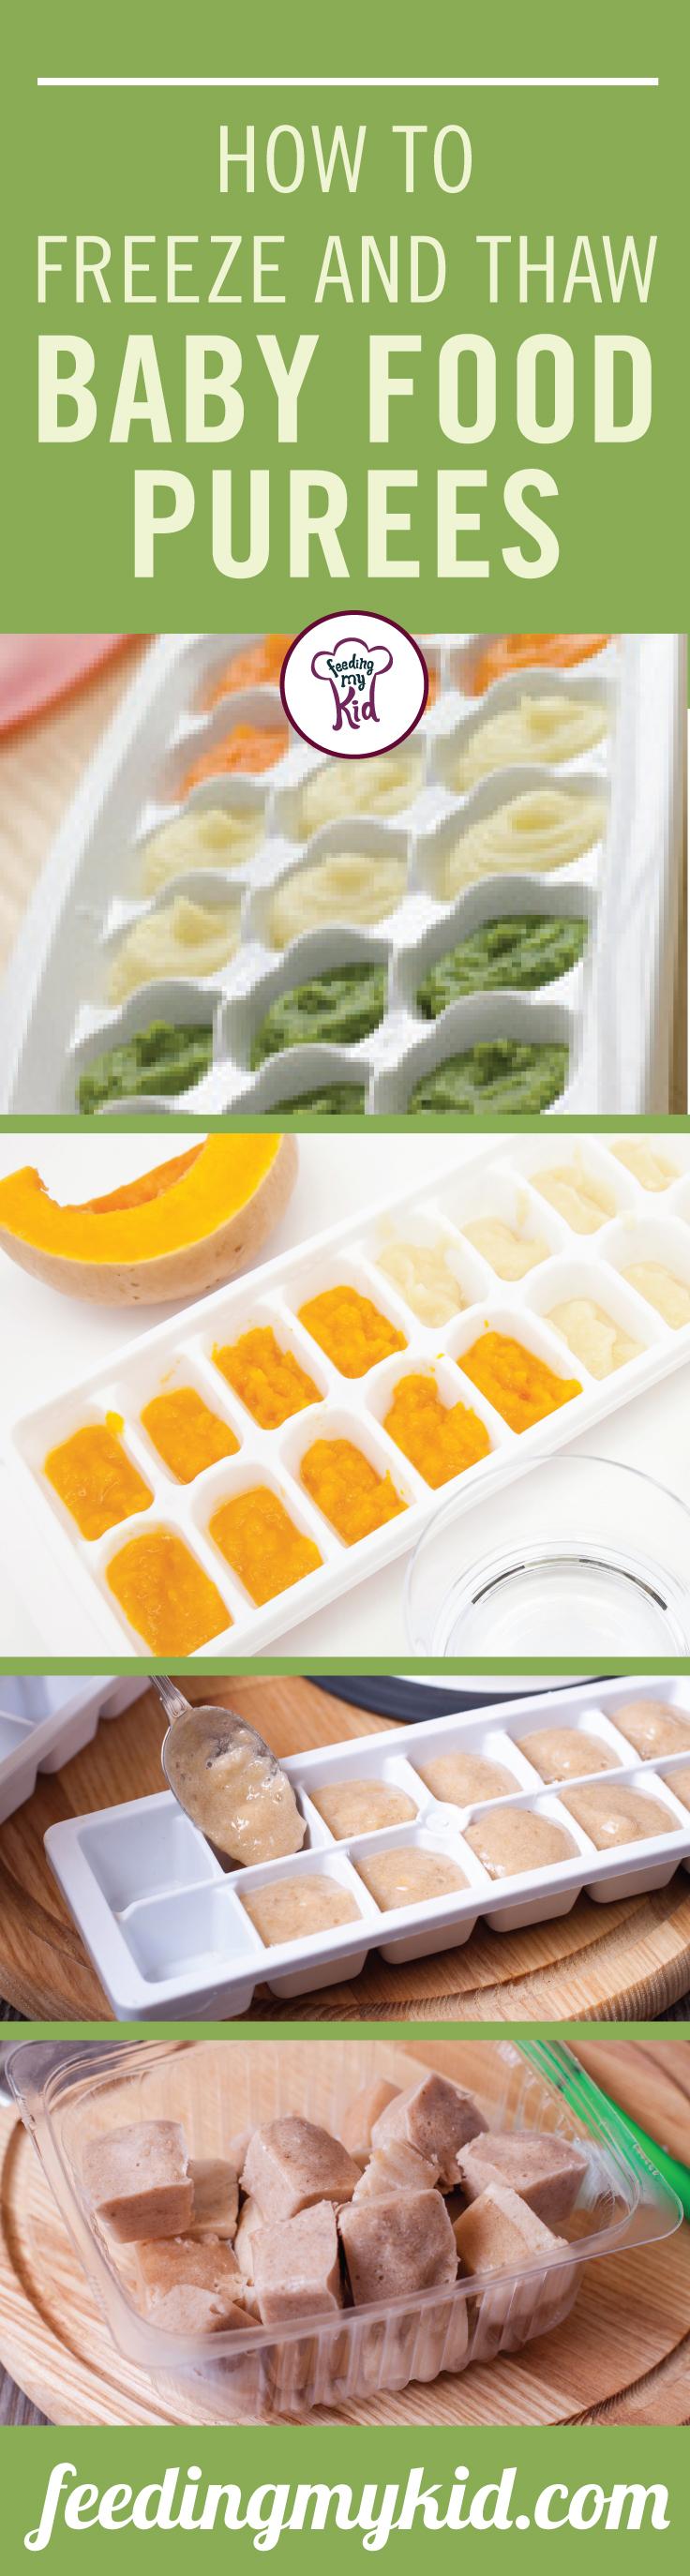 How to Freeze Baby Food